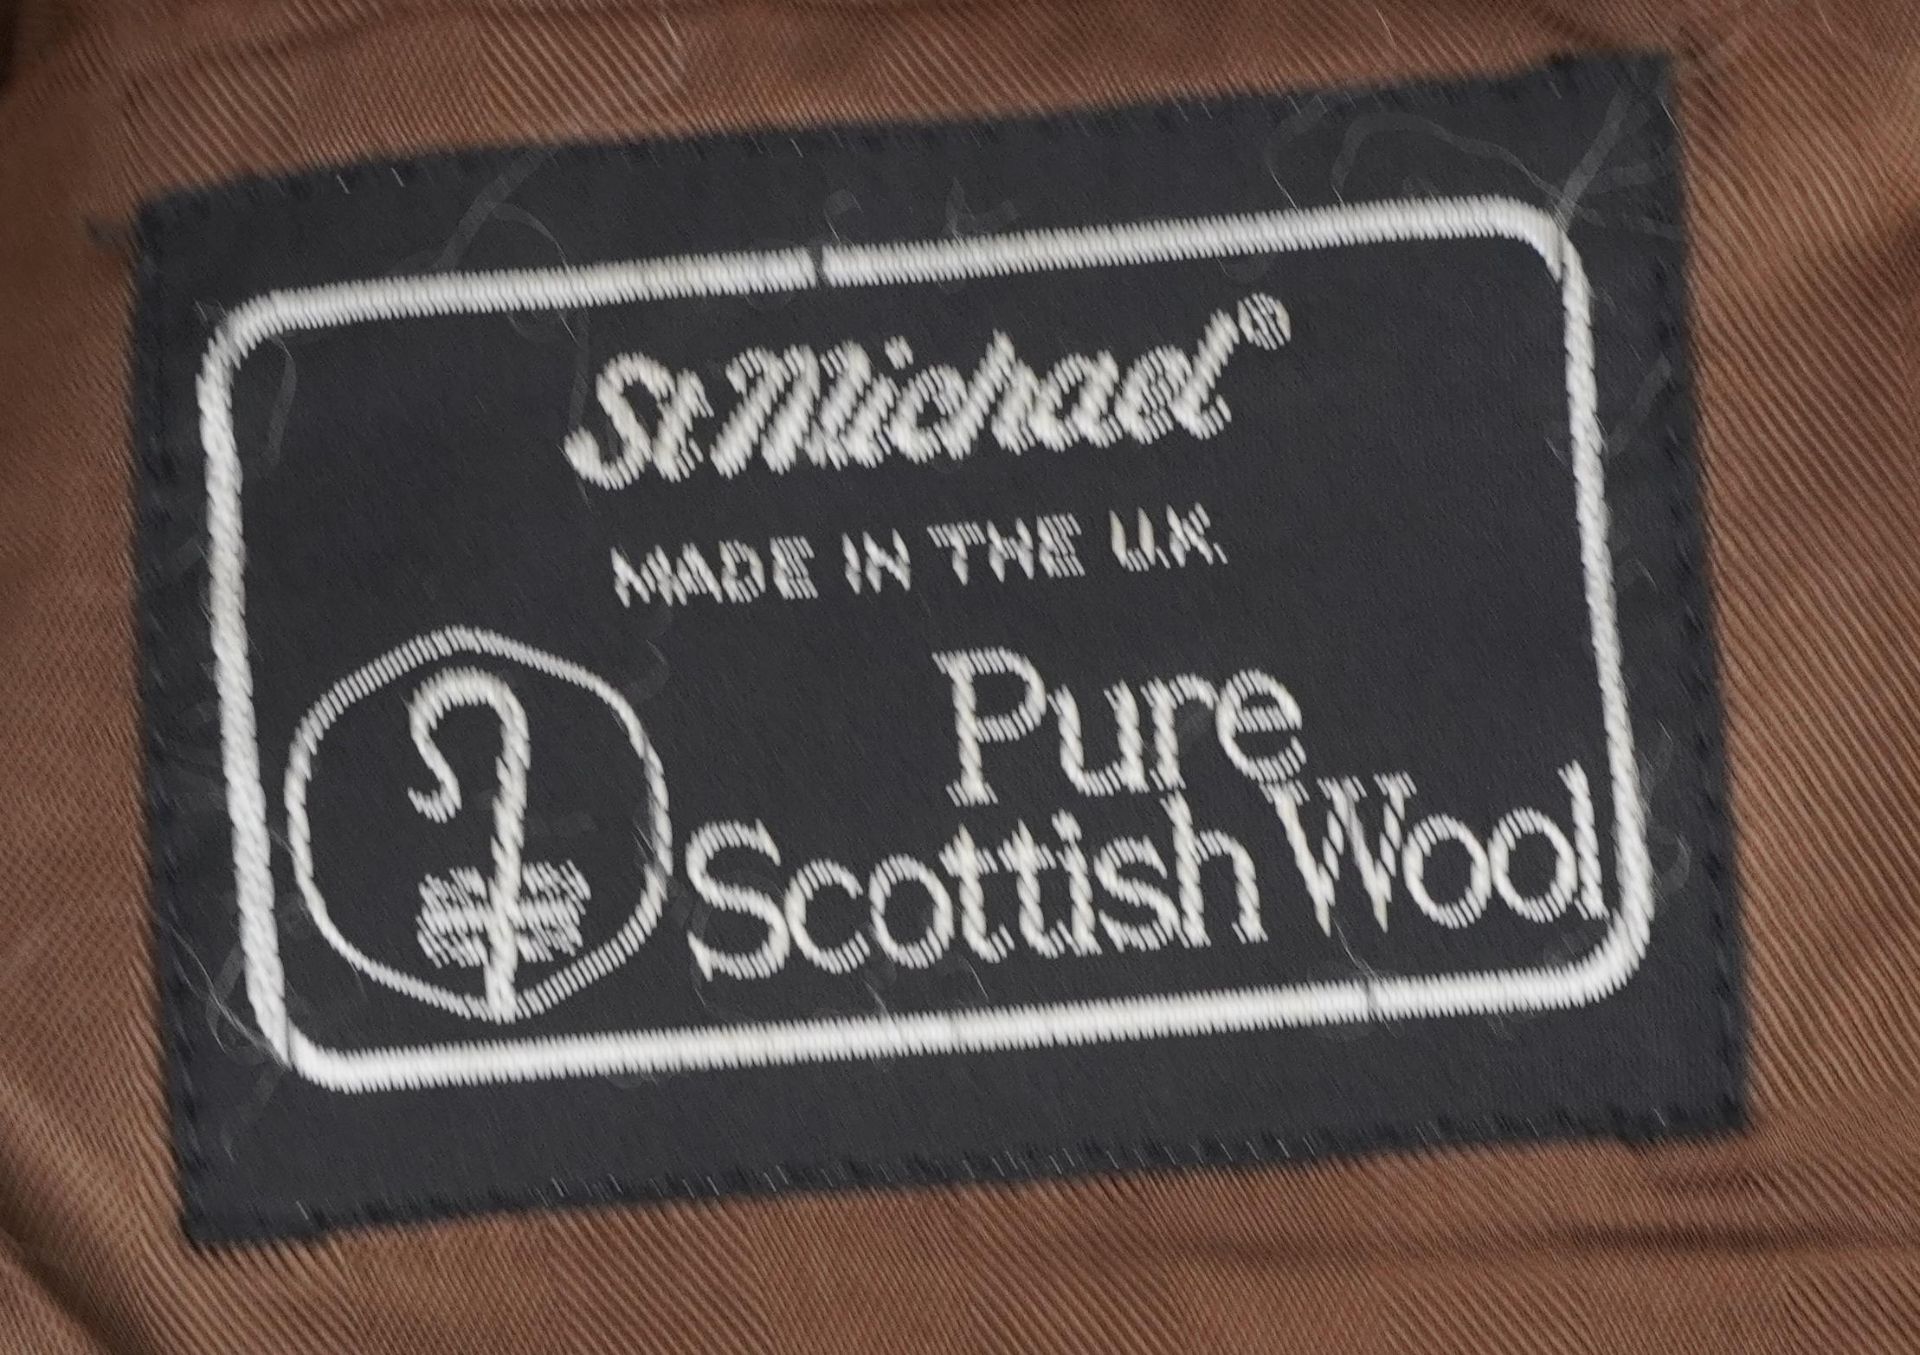 Two Harris tweed gentlemen's pure Scottish wool jackets, 80cm in length : For further information on - Image 3 of 4